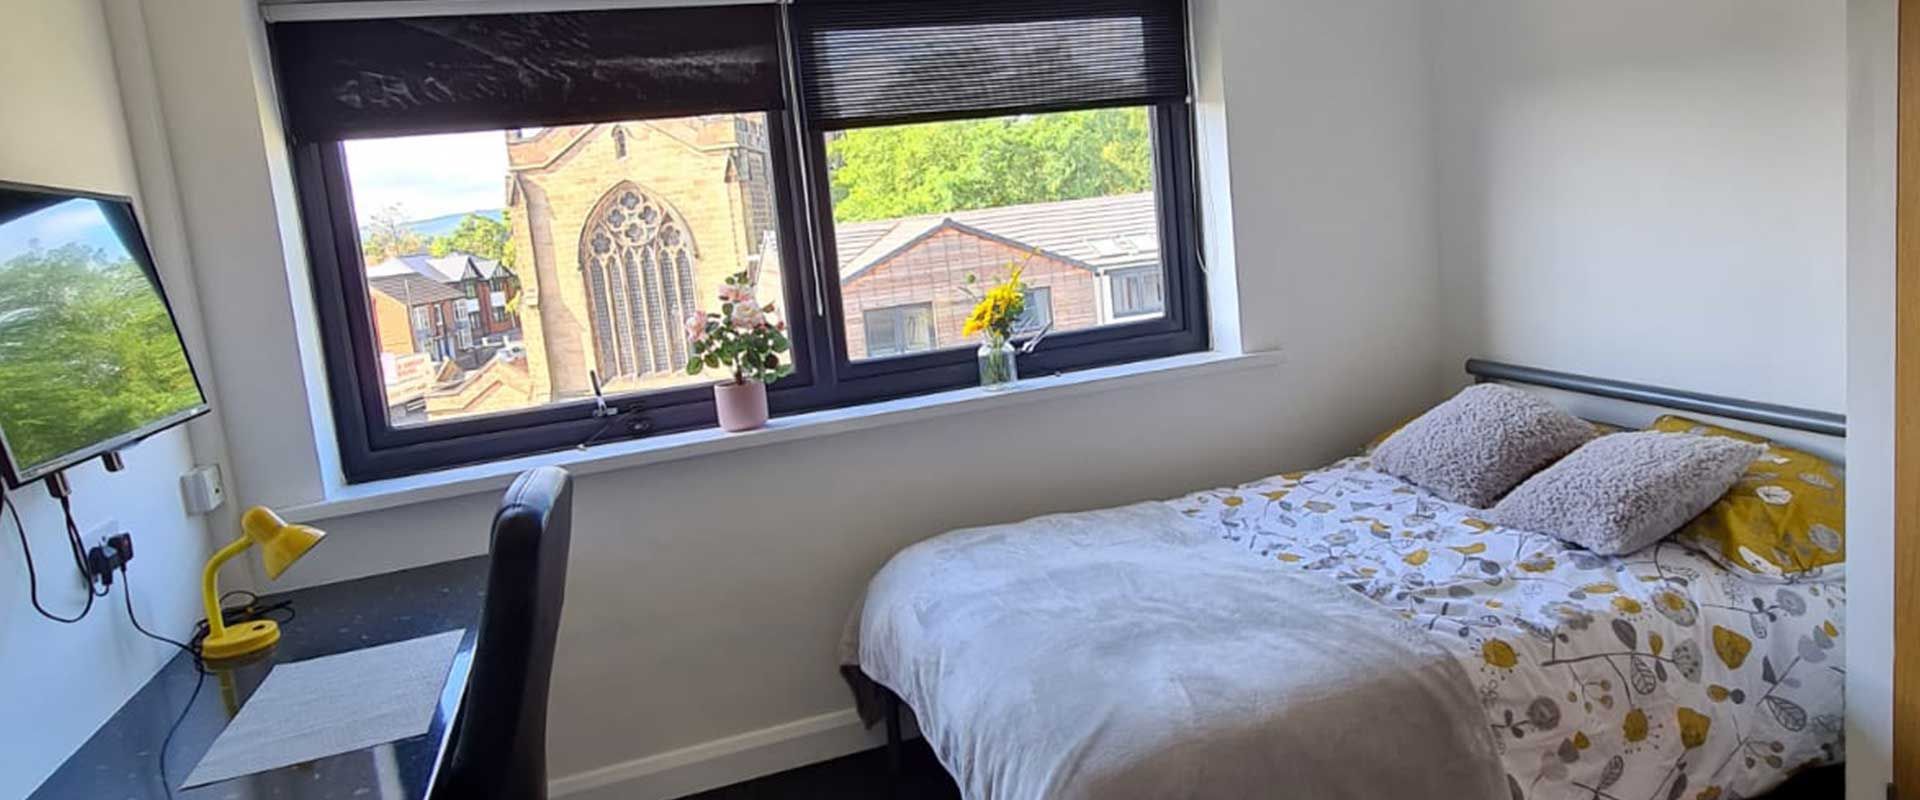 Forest Court Loughborough Accommodation - Enjoy the best views from your spacious modern home